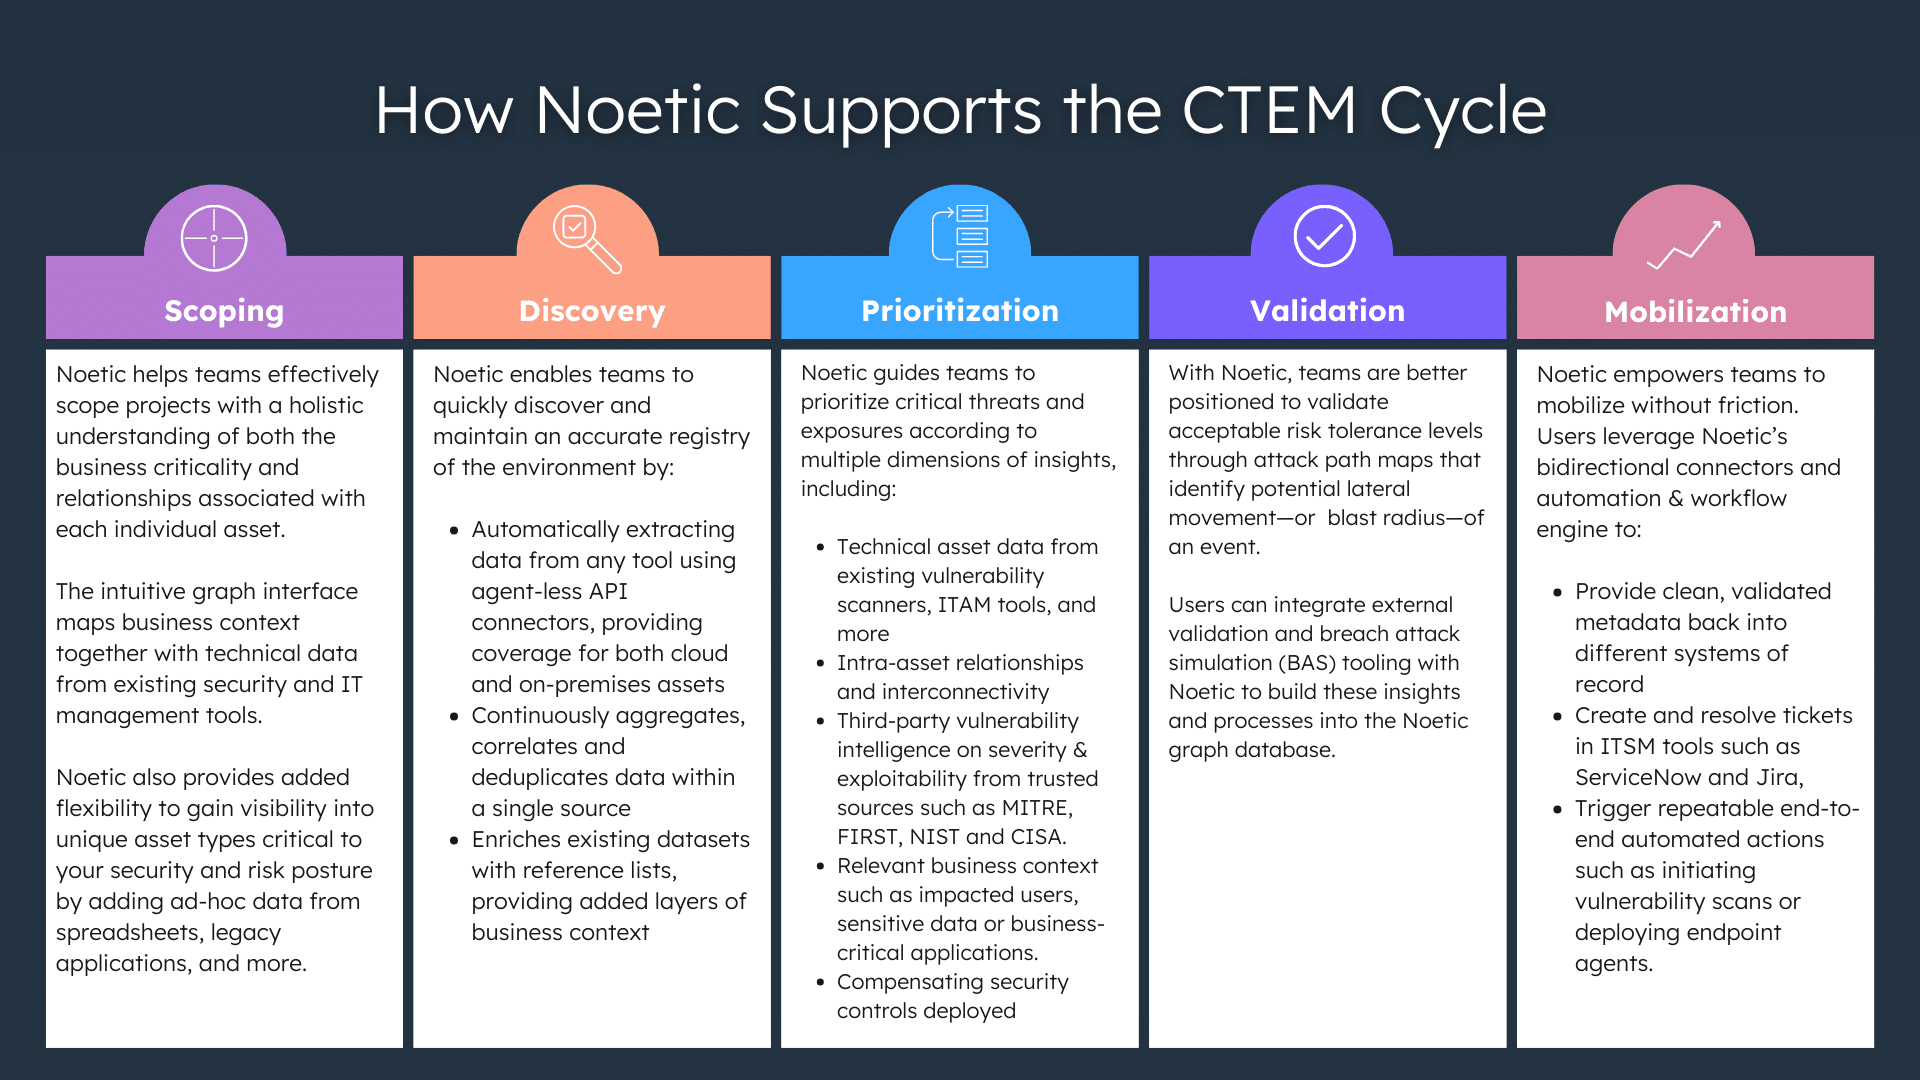 A table breakdown of how Noetic supports each stage of the Continuous Threat Exposure Management lifecycle.